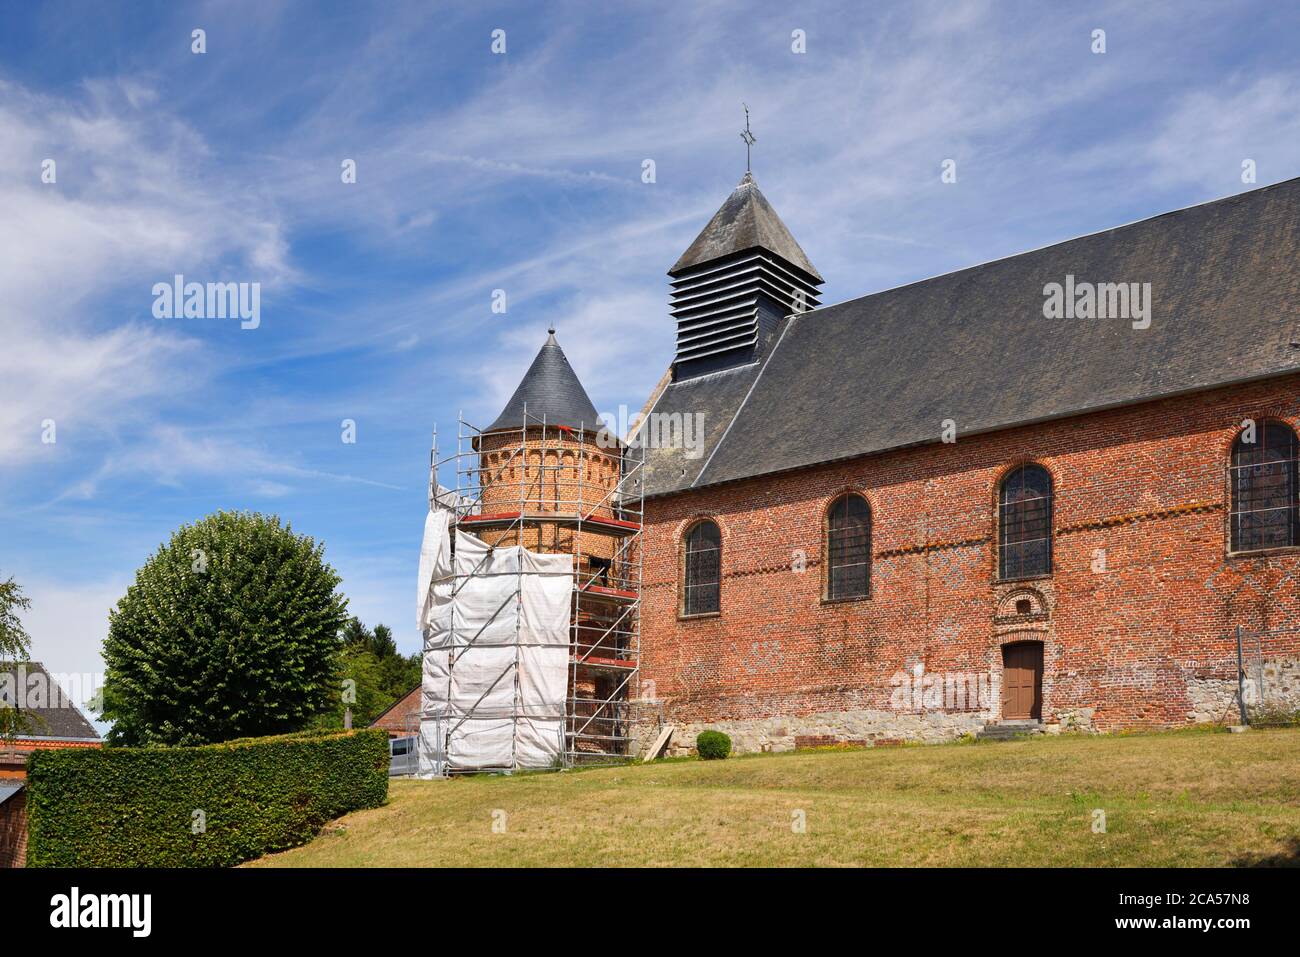 France, Aisne, Esqu?h?ries, Saint-Martin church under rehabilitation was built between 1570 and 1670 one of the most remarkable churches in Thi?rache Stock Photo